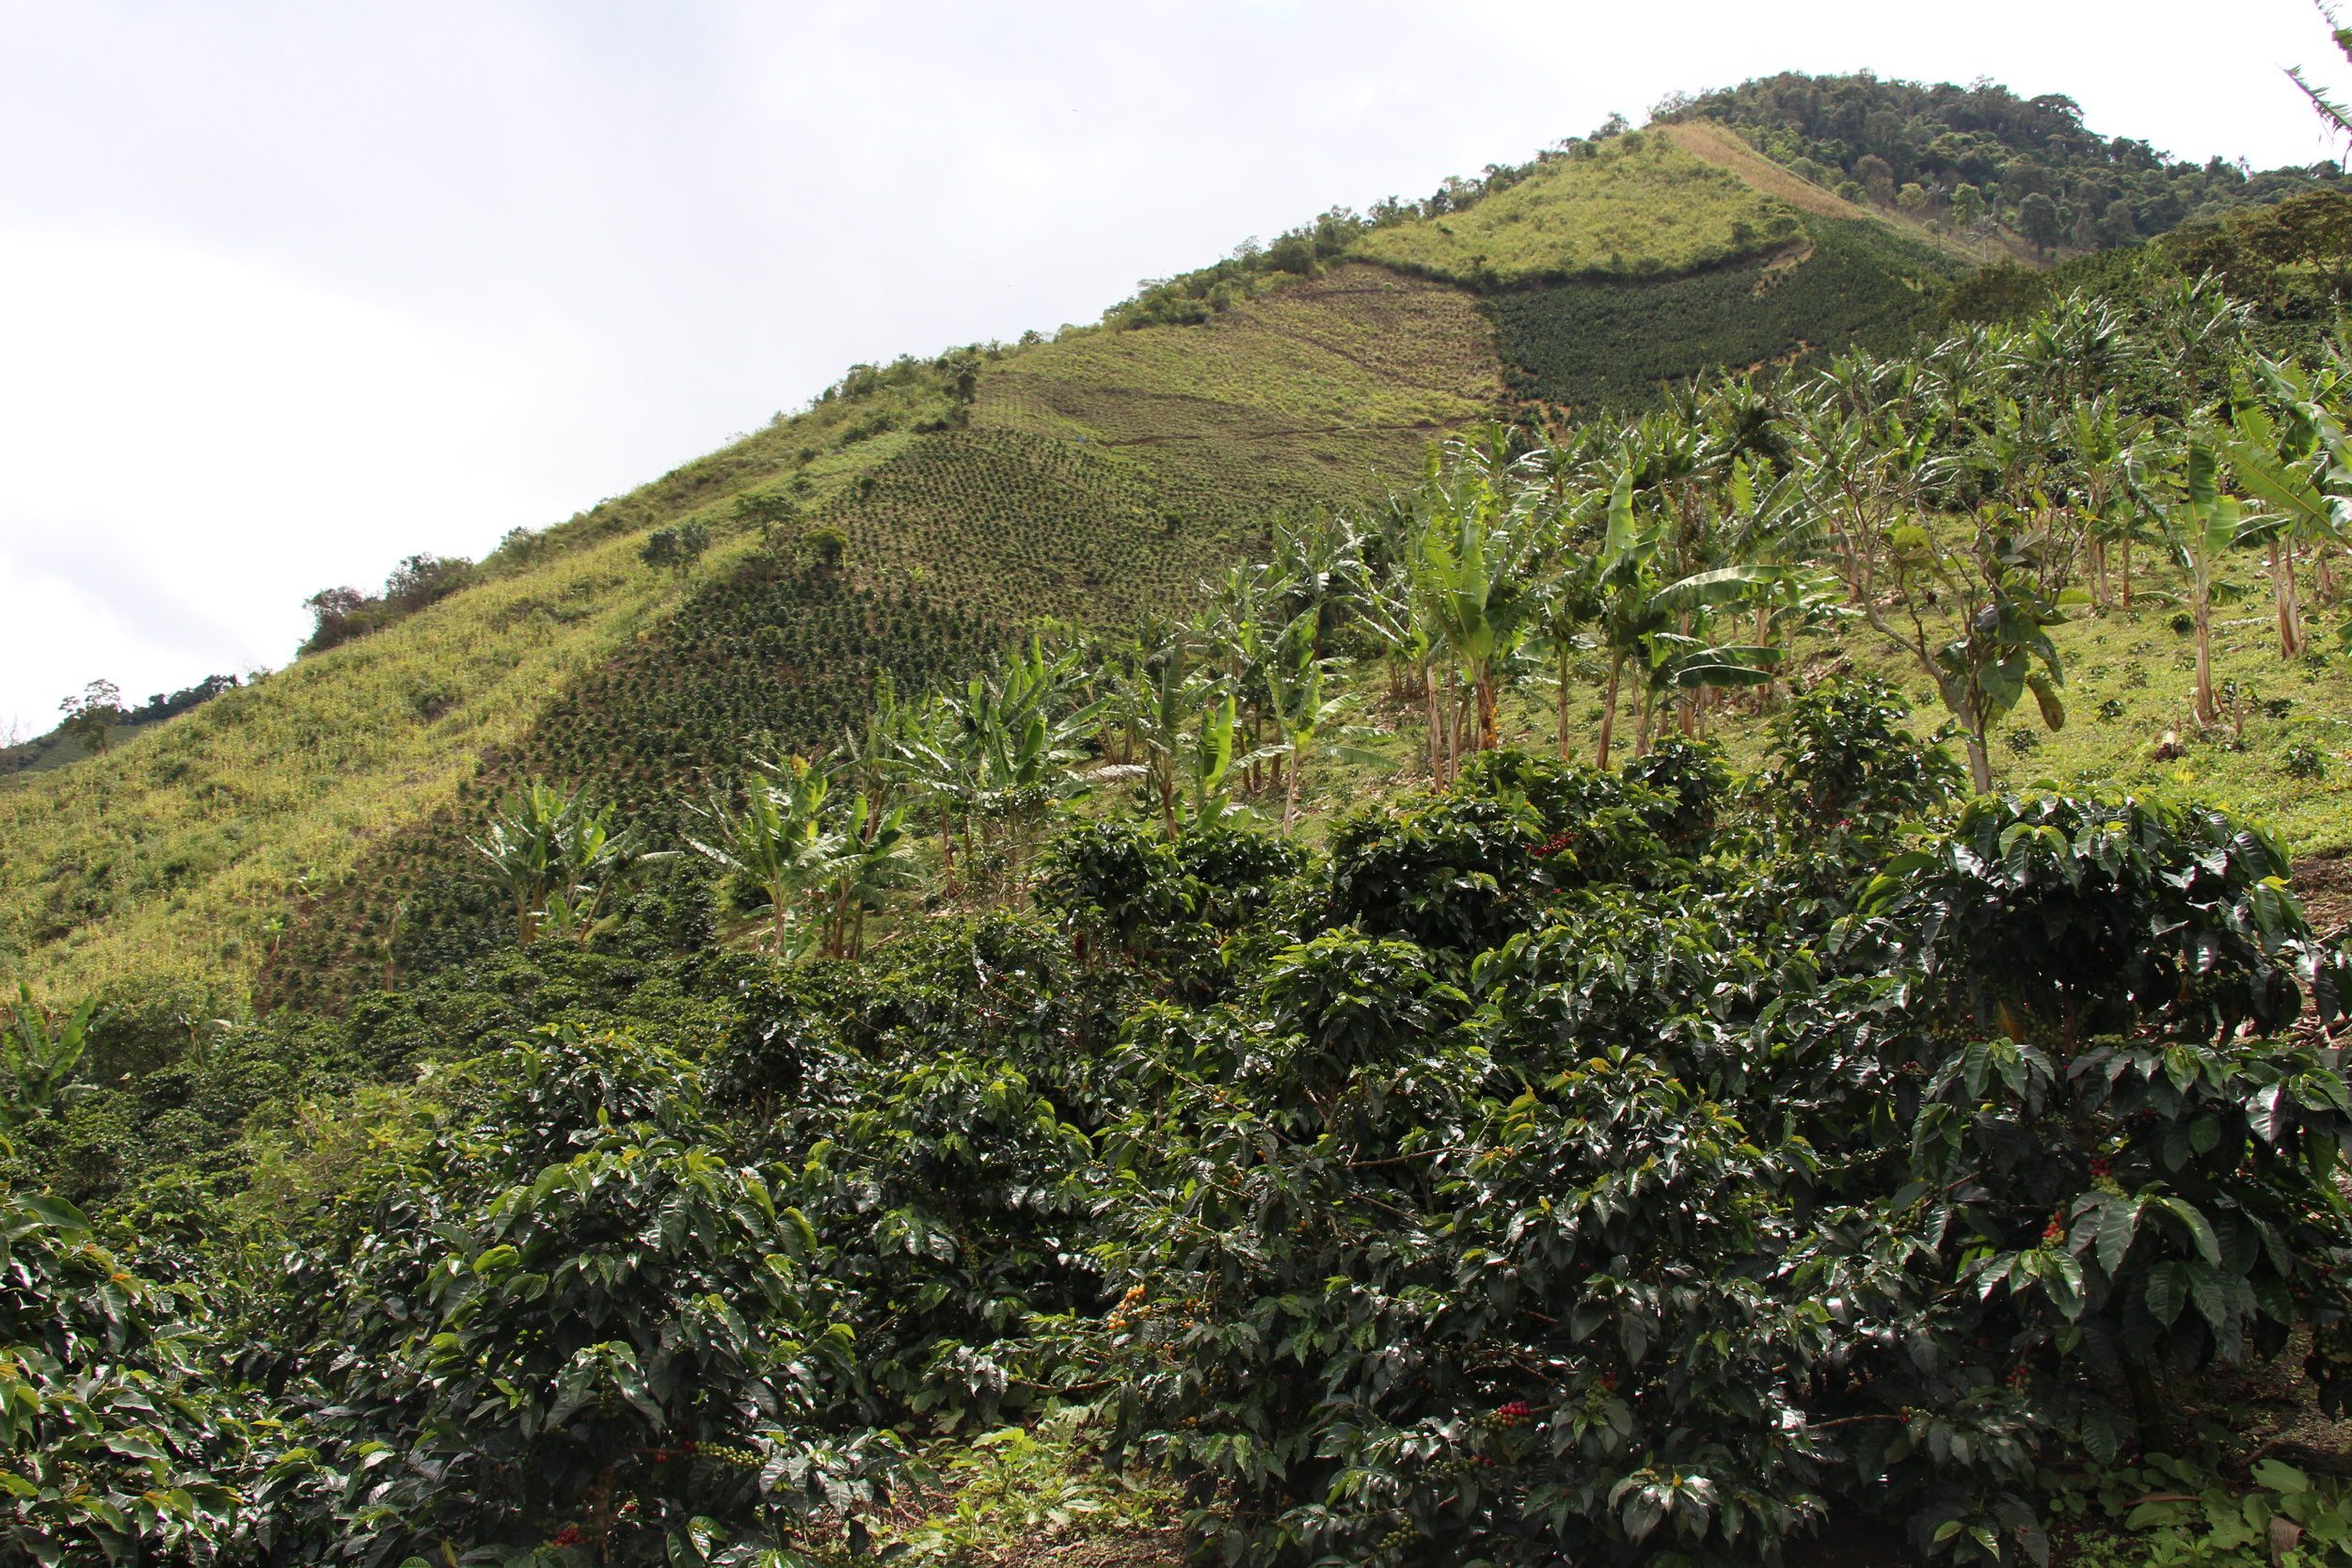 Steep Colombian slopes